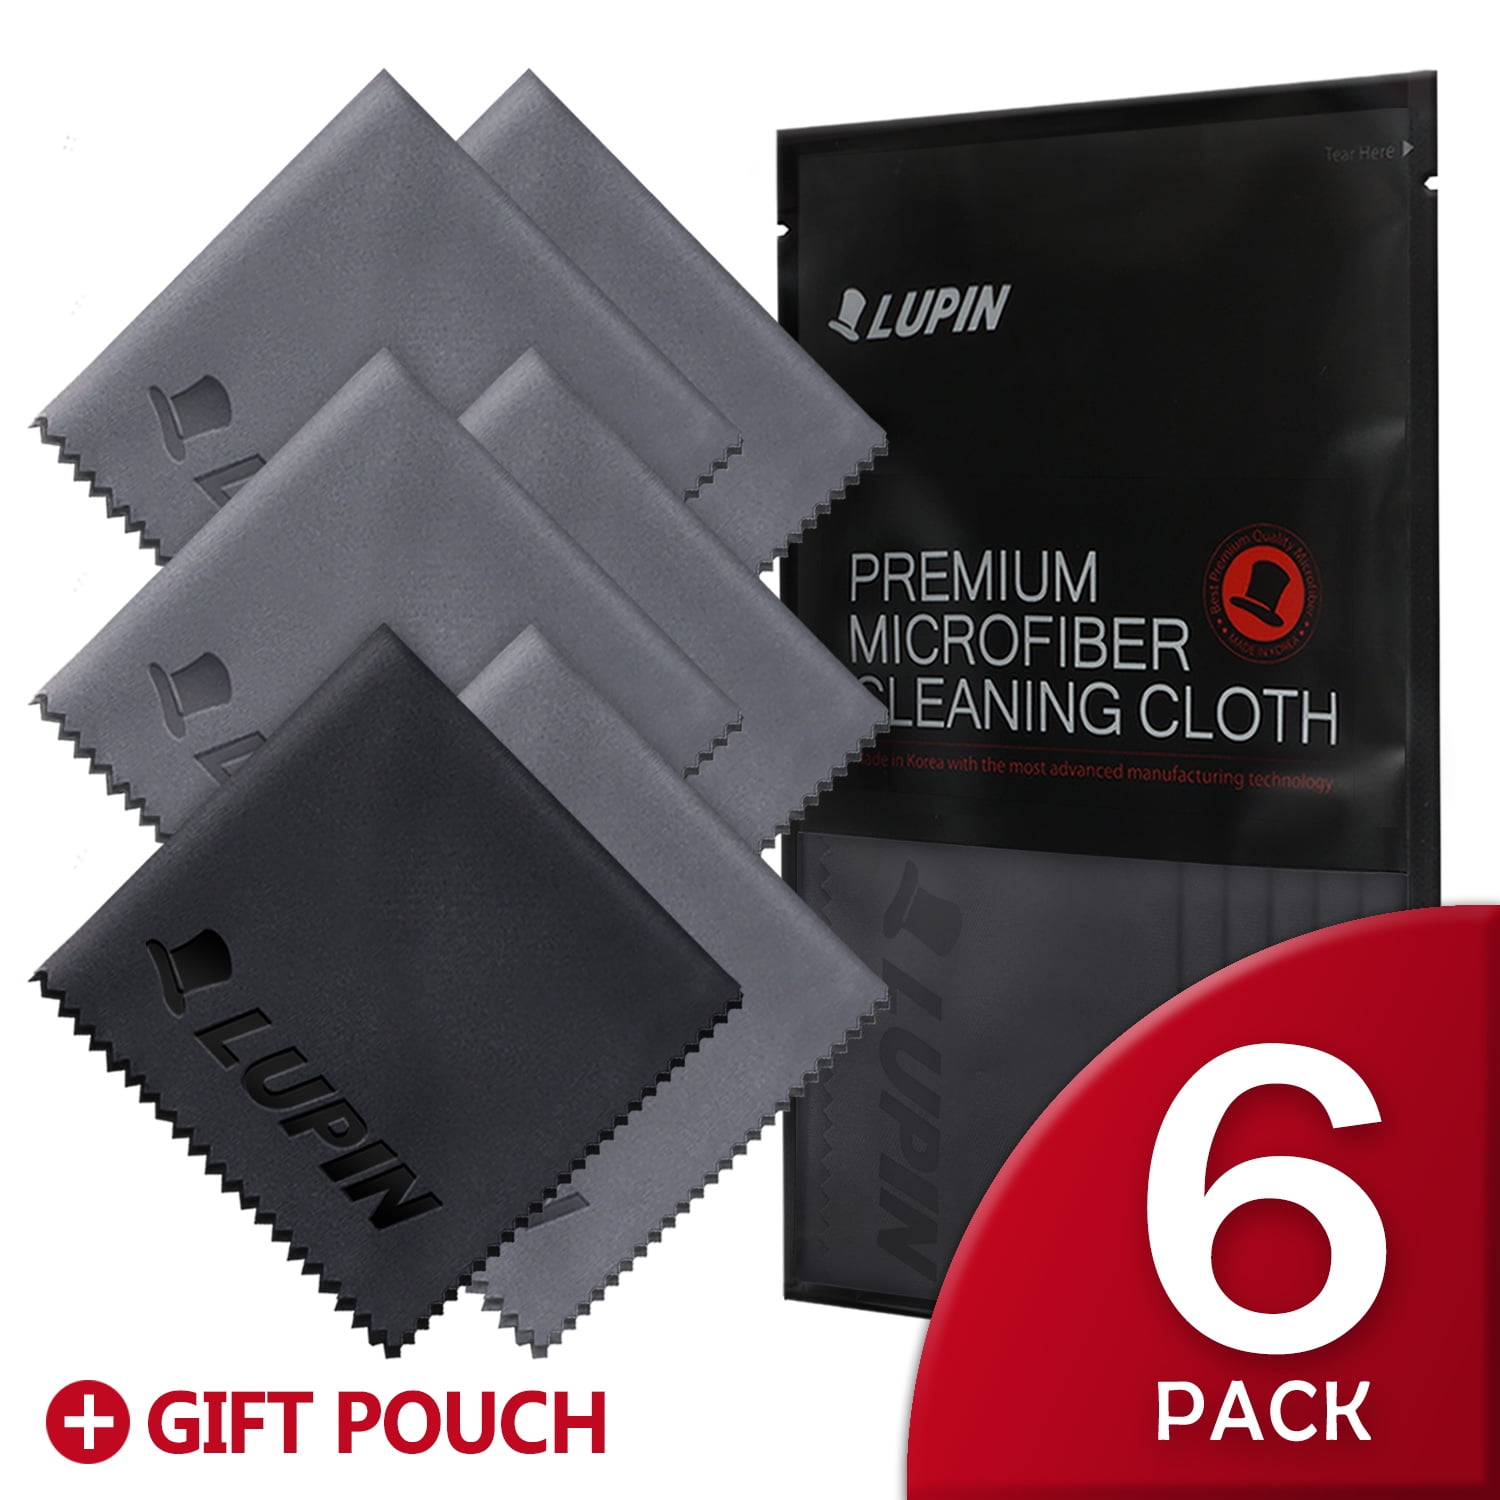 TV Lenses Glasses Cleaning Cloth Premium 100% Microfiber Cleaning Cloths 2 Pack, Style 1 LCD Monitor Tablets idea for Smart Phones Camera iPhone Cleaning Cloths ipad Optics Etc 